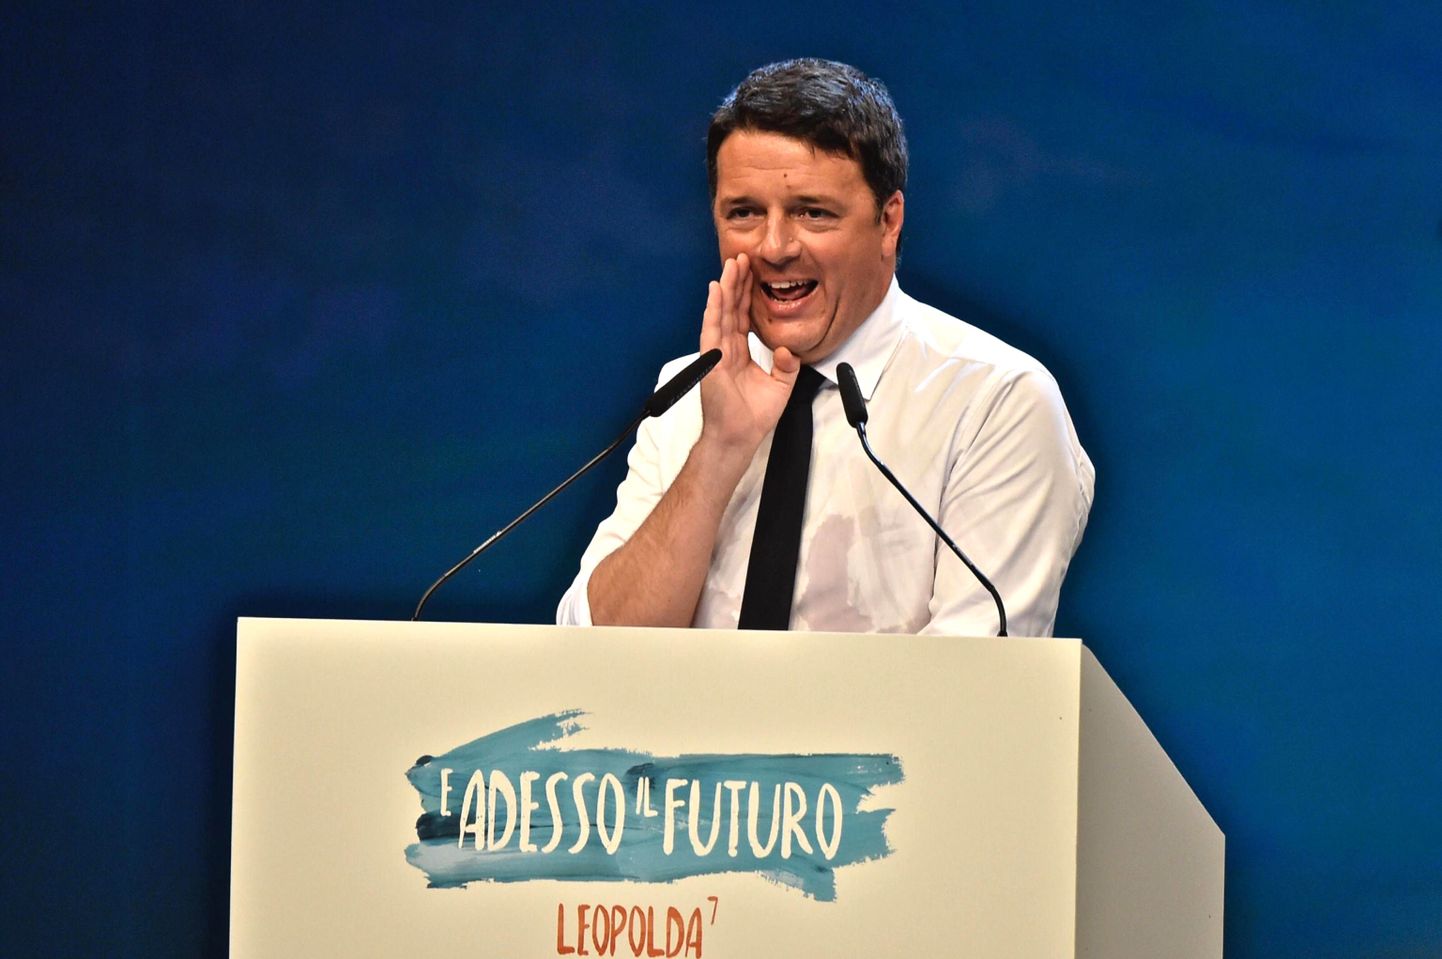 Italian Premier Matteo Renzi adresses a rally in Florence, Italy, Sunday, Nov. 6, 2016. Italian vill vote for a constitutional referendum next Dec. 4, a vote on which the government's current leader has staked his future. (Maurizio Degl'Innocenti/ANSA via AP)